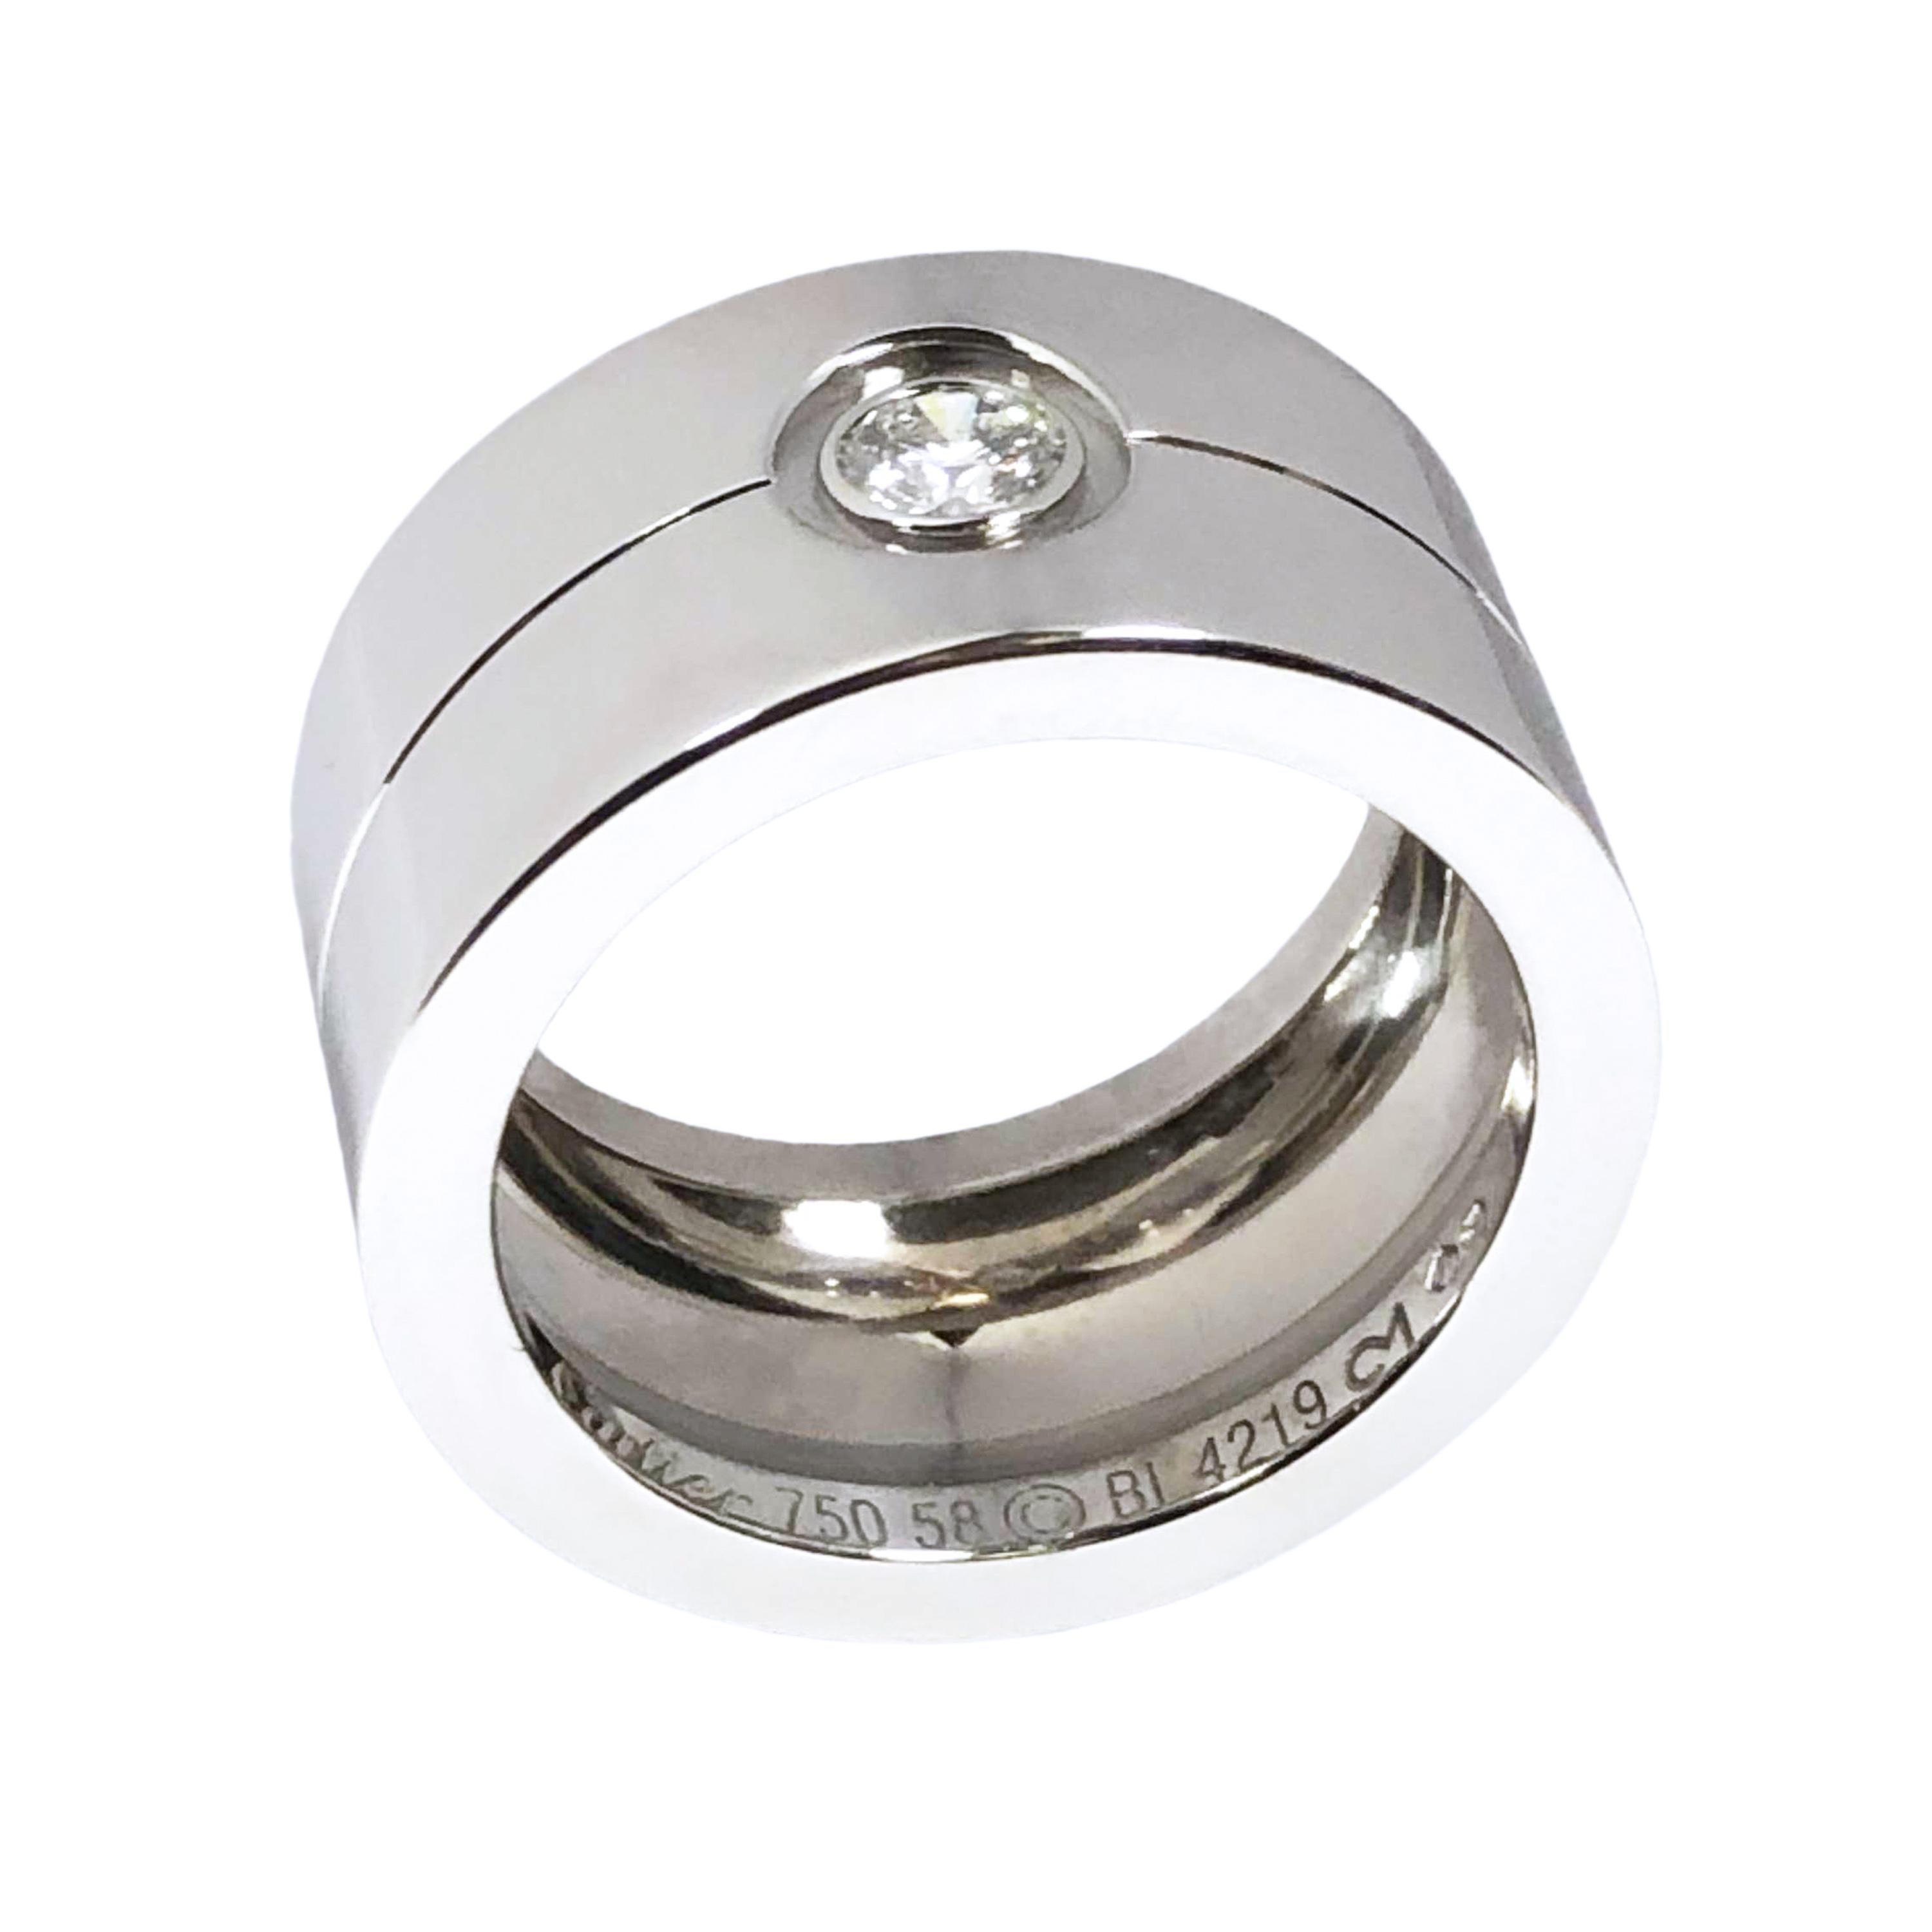 Circa 2010 Cartier 18K White Gold Wide Love Band Ring, this ring is from a very limited collection and are hard to find. Measuring 1/2 inch wide and 2 MM thick, centrally set with a 1/4 carat Round brilliant cut Diamond. Finger size 8 1/2 ( 58